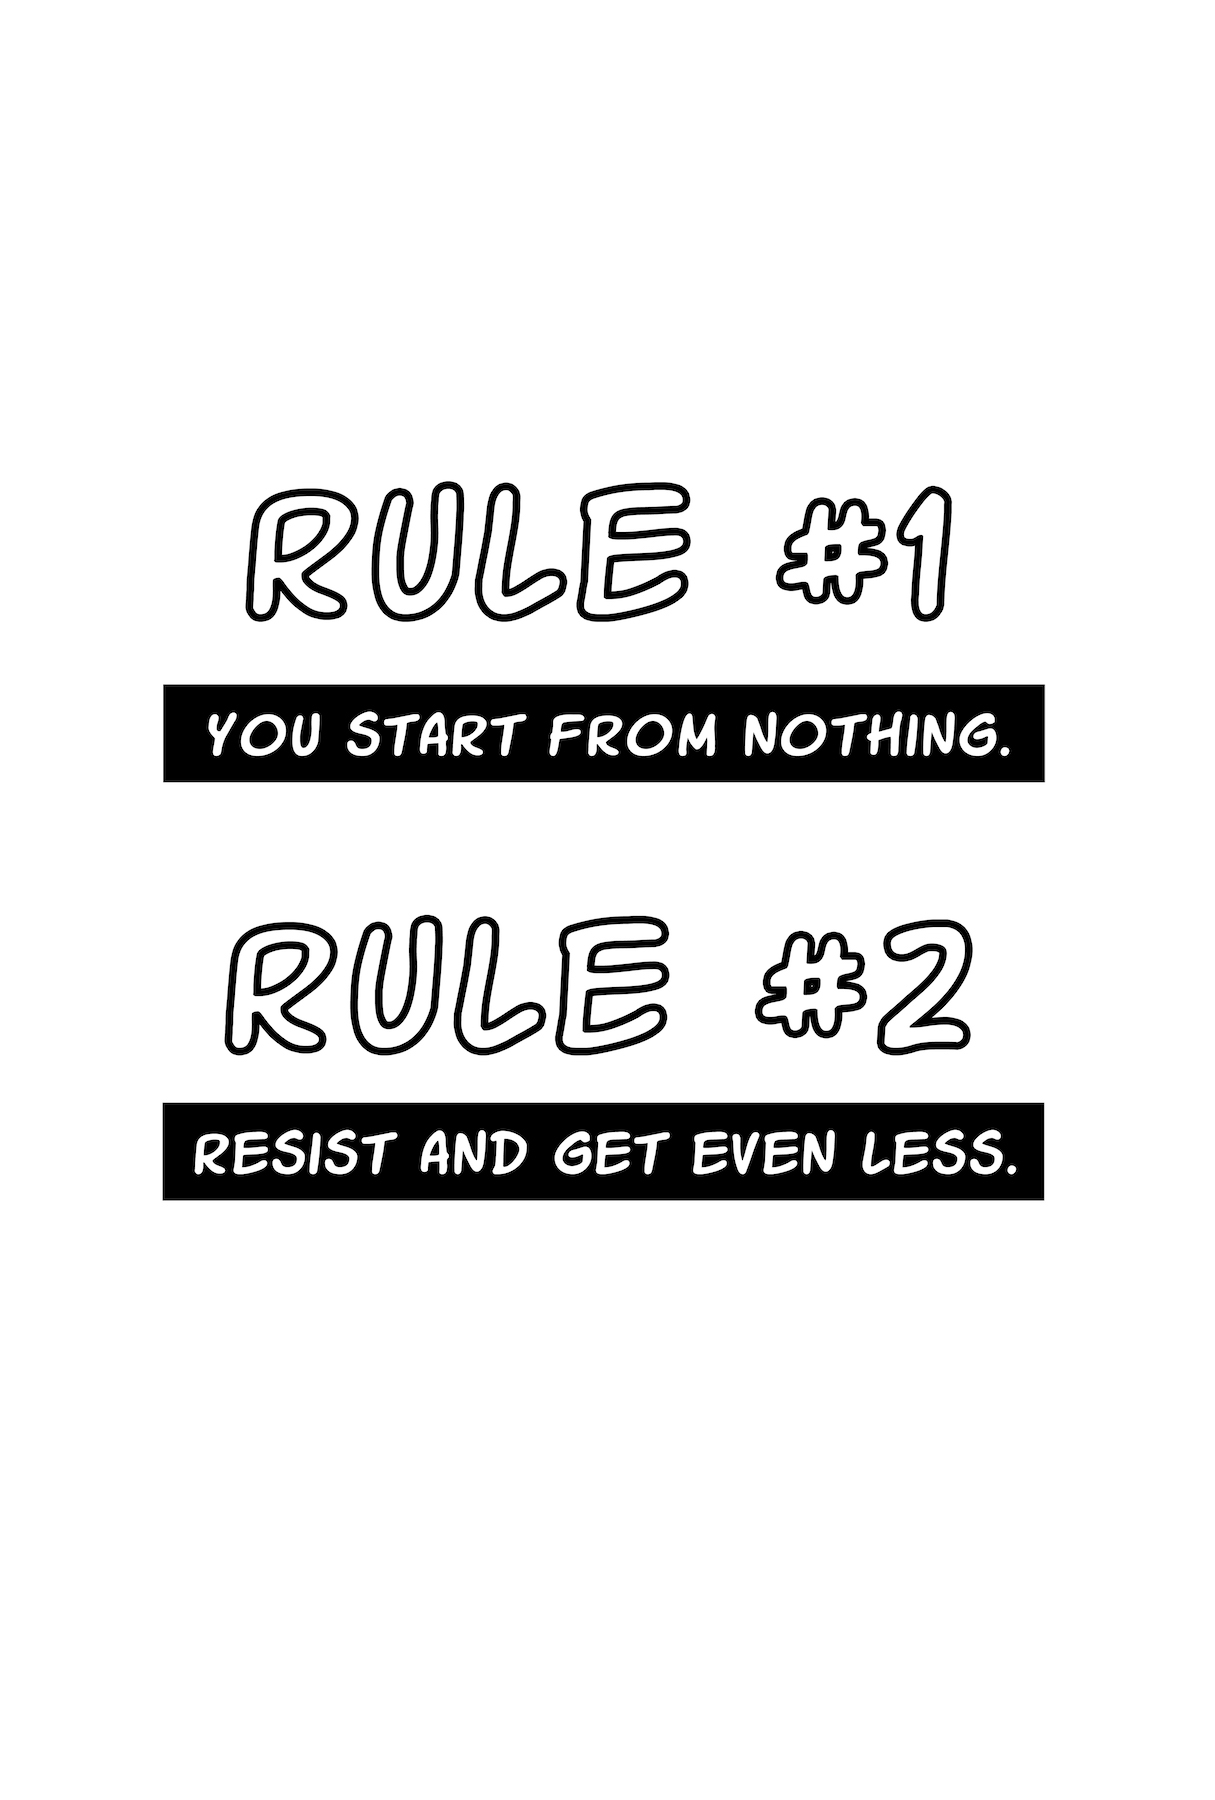  you start from nothing., resist and get even less., rule #1, rule #2, 